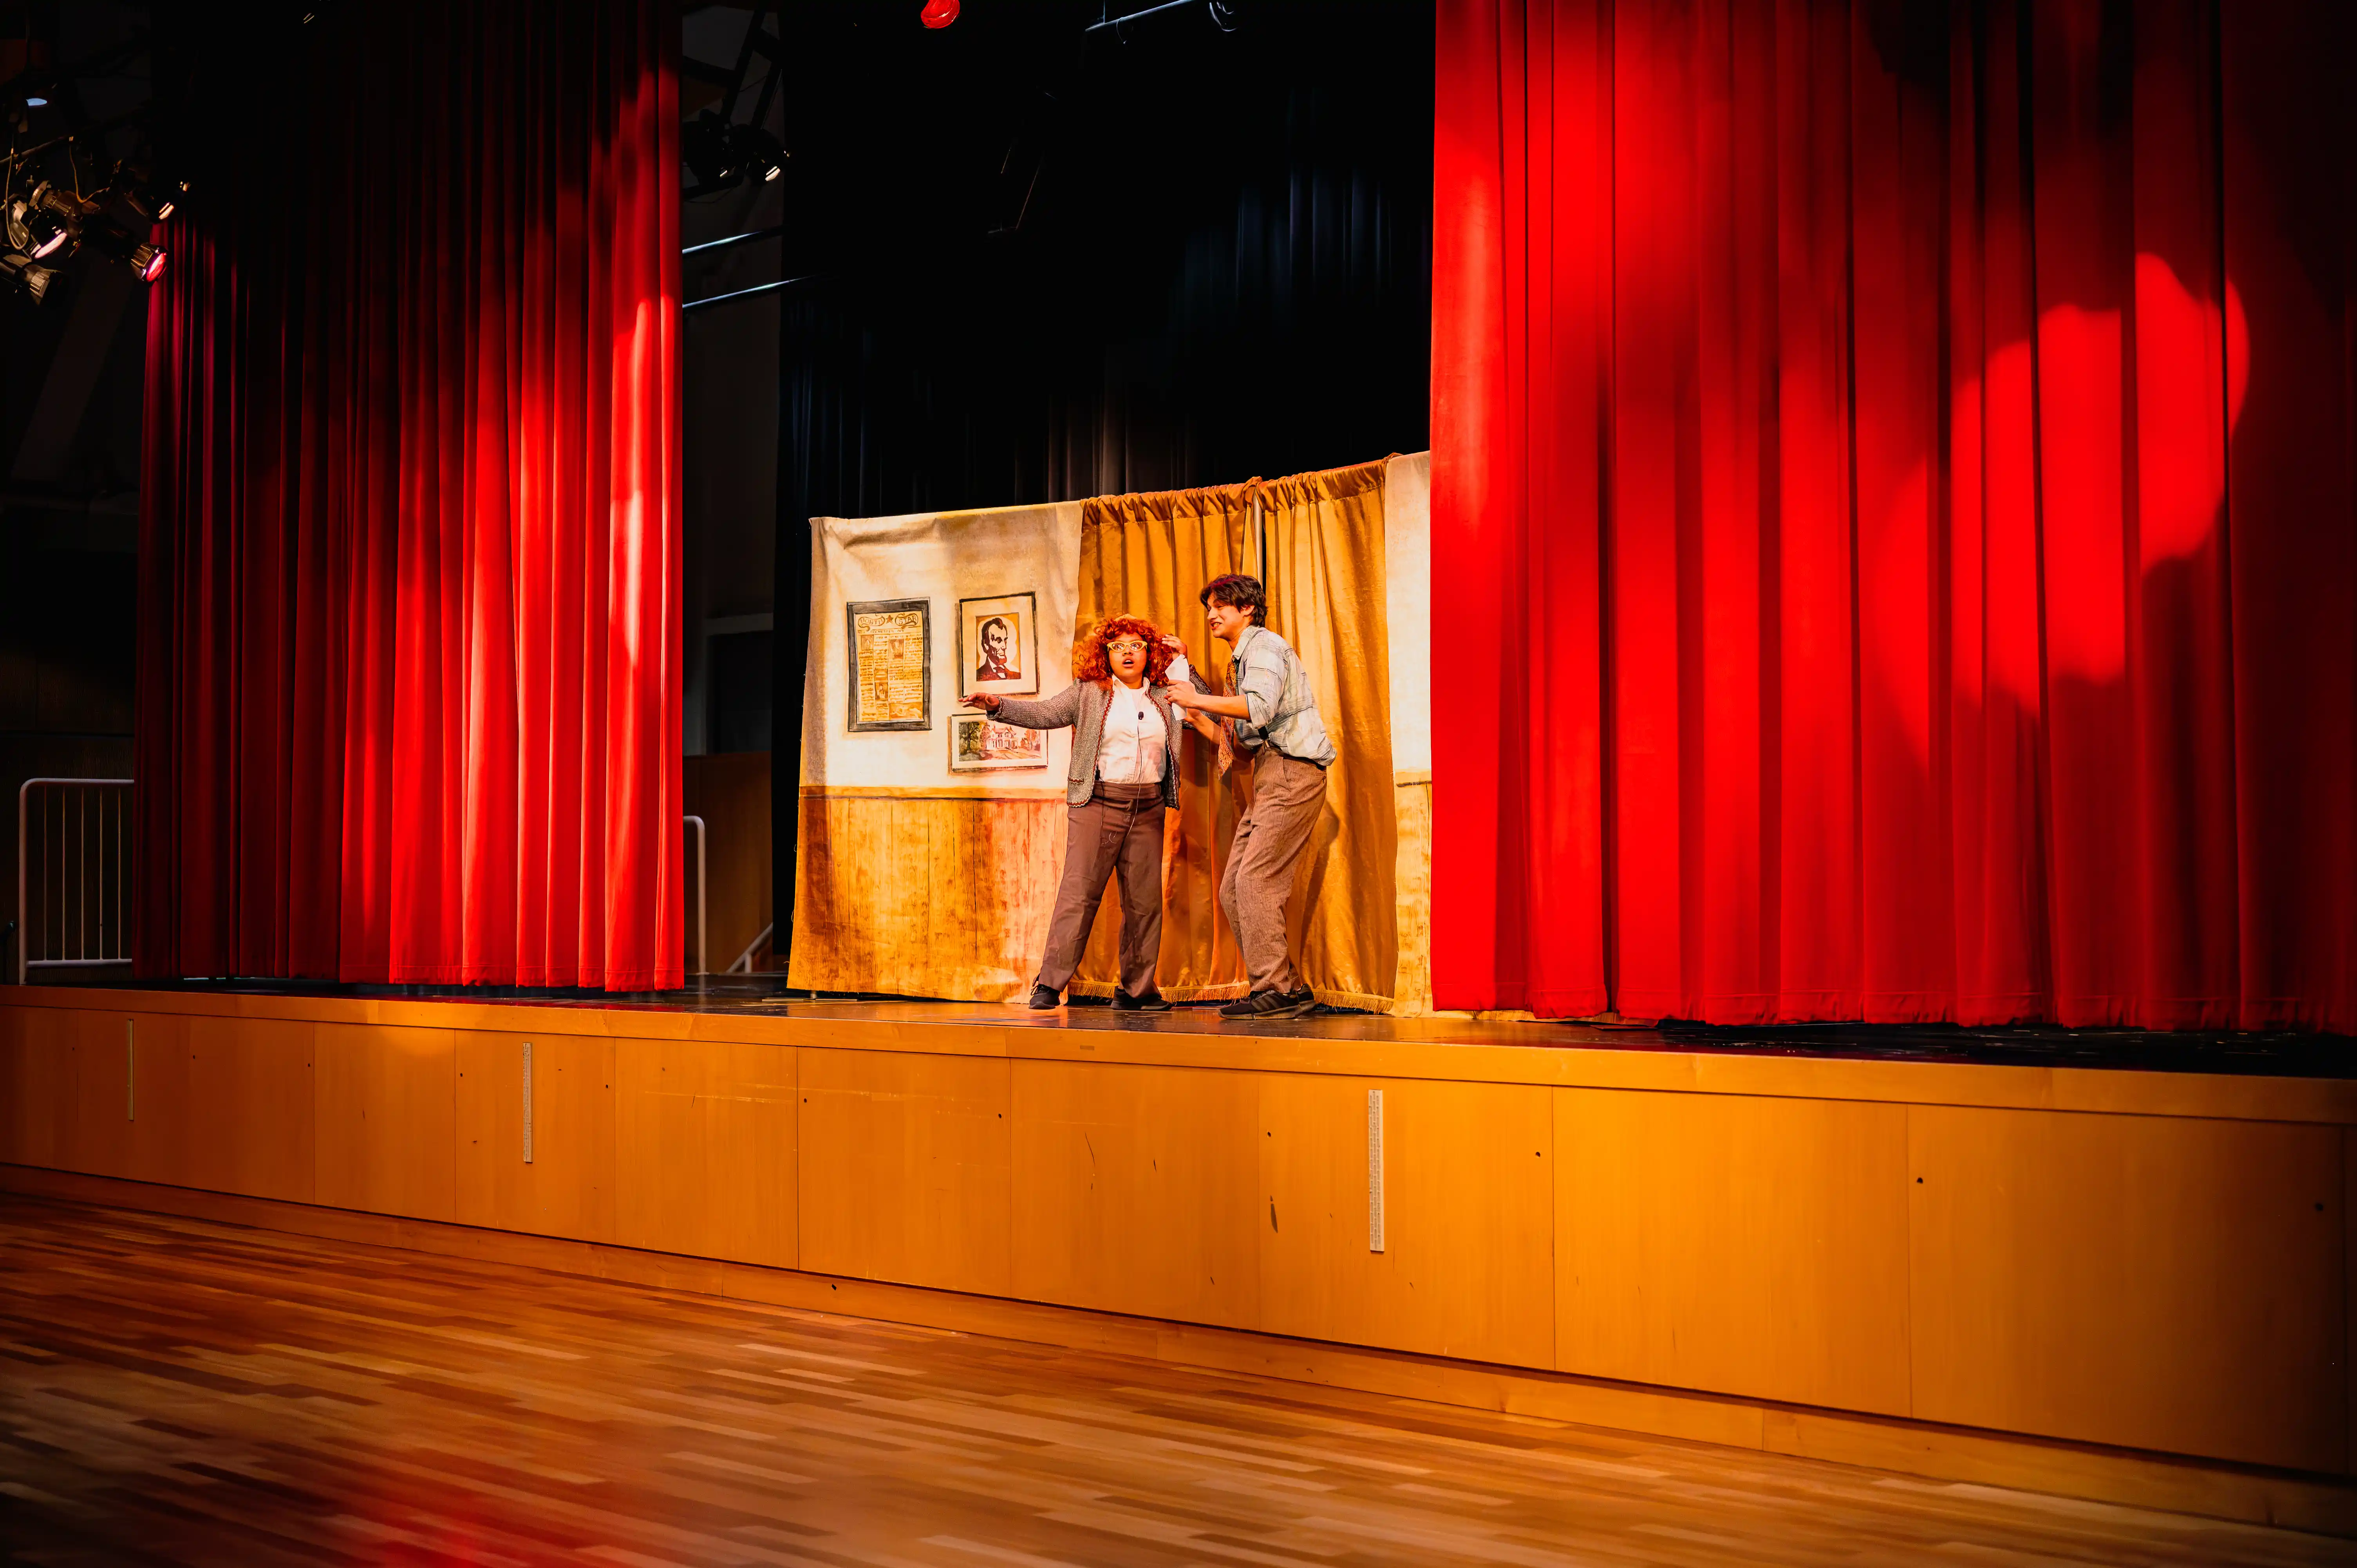 Two actors on stage during a theater performance with red curtains in the background.